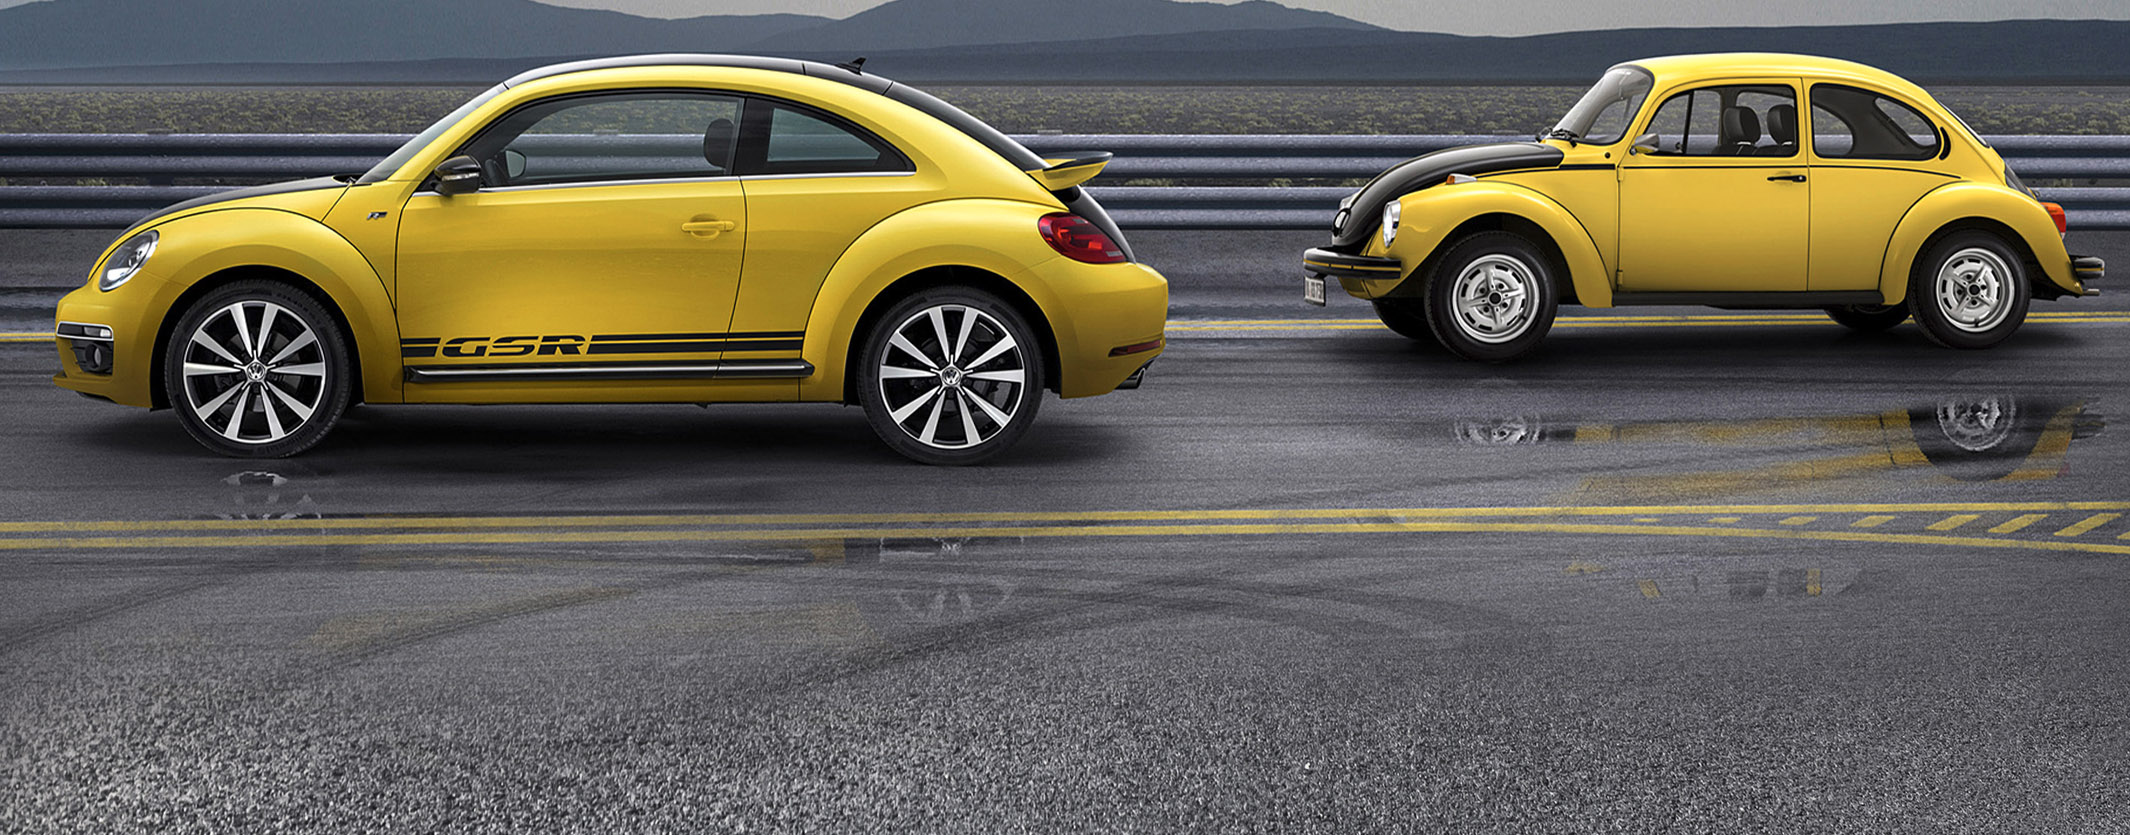 DubiCars Car Spotlight — Volkswagen Beetle History, Generations, Models & More: The Evolution Of An Icon